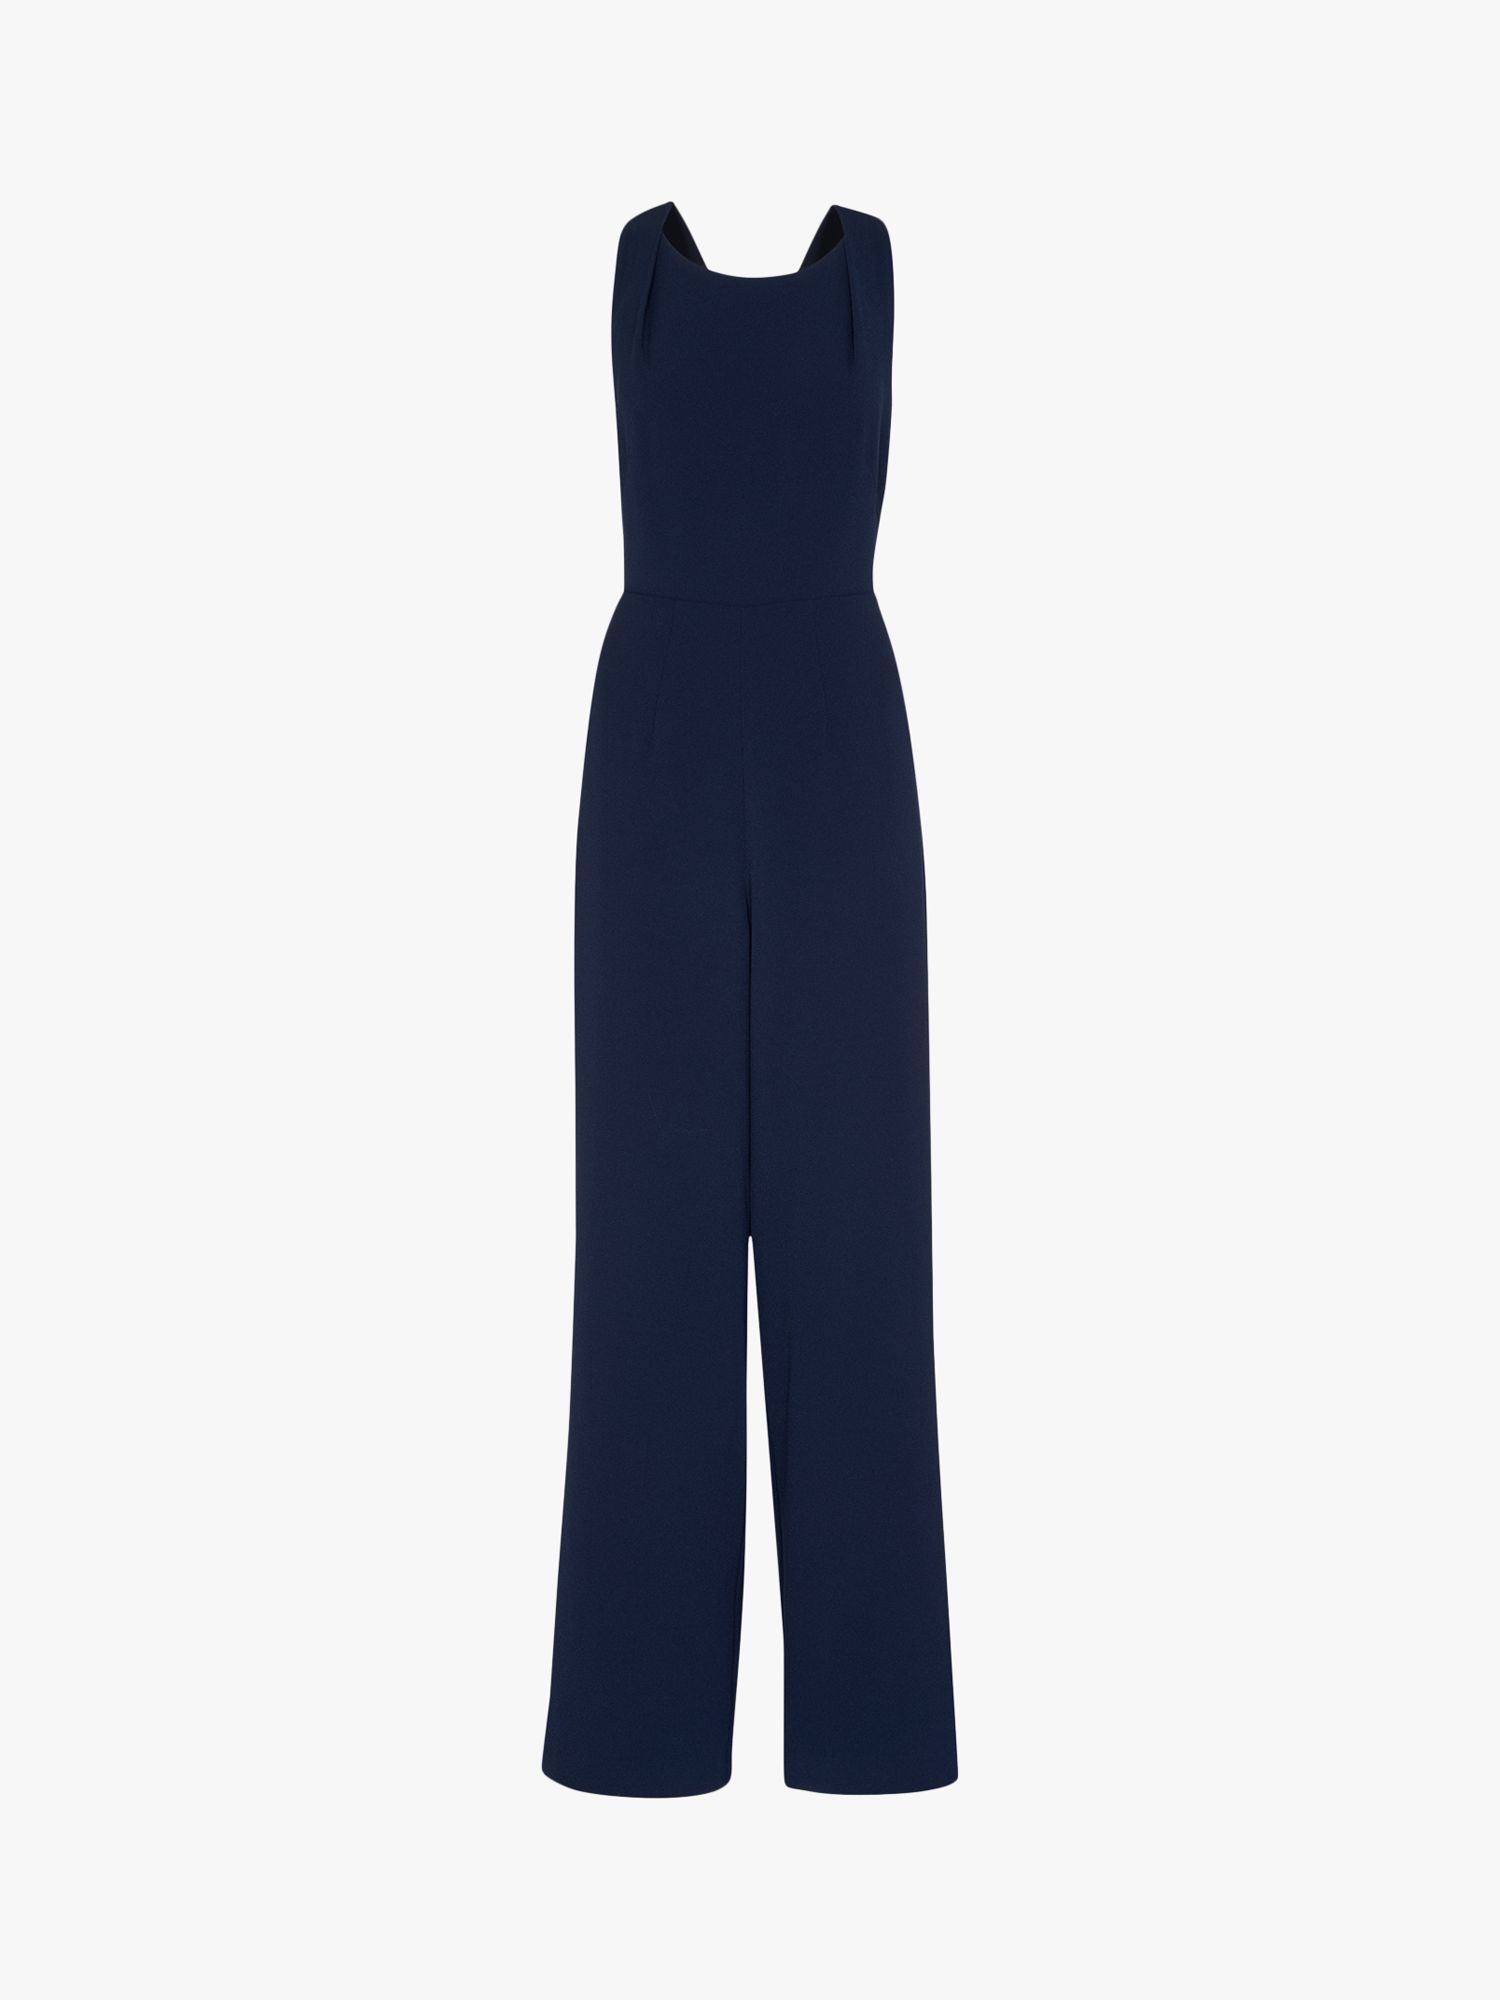 Buy Whistles Tie Back Maxi Jumpsuit, Navy Online at johnlewis.com